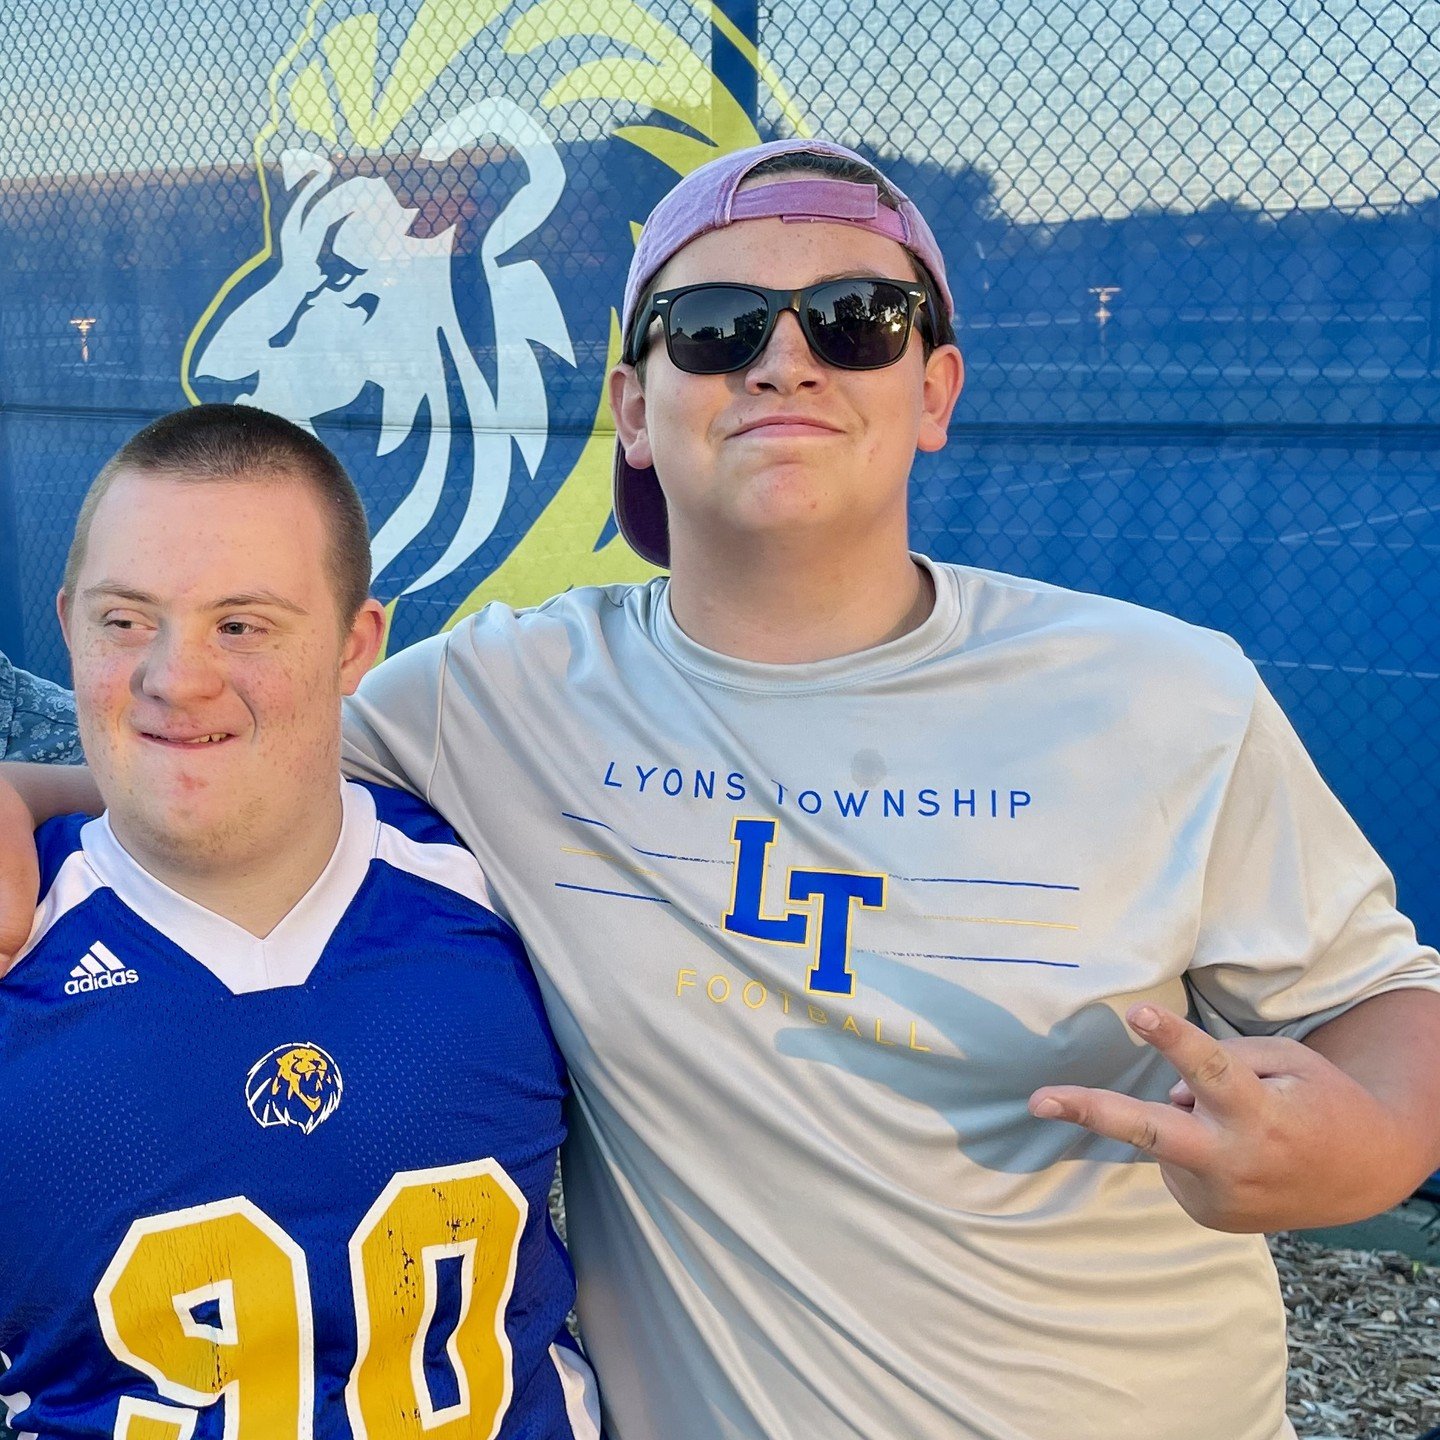 hijackcards's profile picture
Happy BFF (Best Friends Friday) This is Luke. Luke is one of a kind.
.
.
@specialolympics @specialolympicsillinois @lths204 @ltspecialolympics @bestbuddieslt #worlddownsyndromeday #inclusion #downsyndrome #sportscards #t